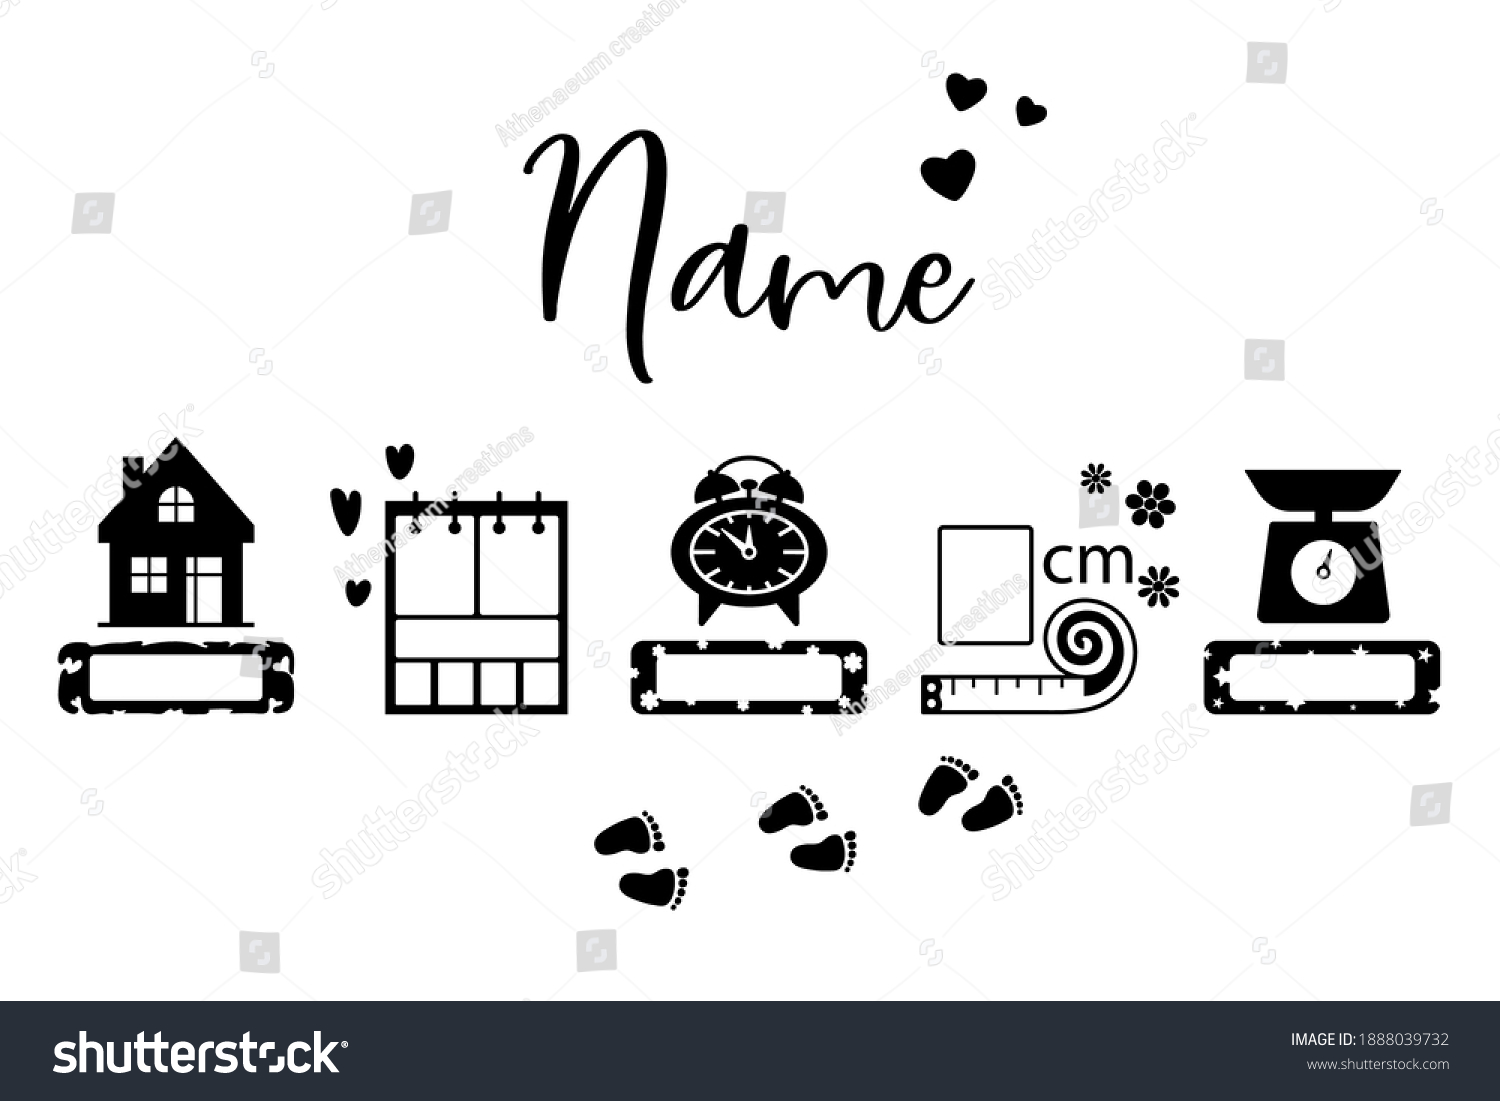 SVG of Birth Stats icons. Birth Announcement design. Baby Stats vector illustration. Set with hand drawn elements for decorating albums, metrics, posters and invitation cards for baby. svg